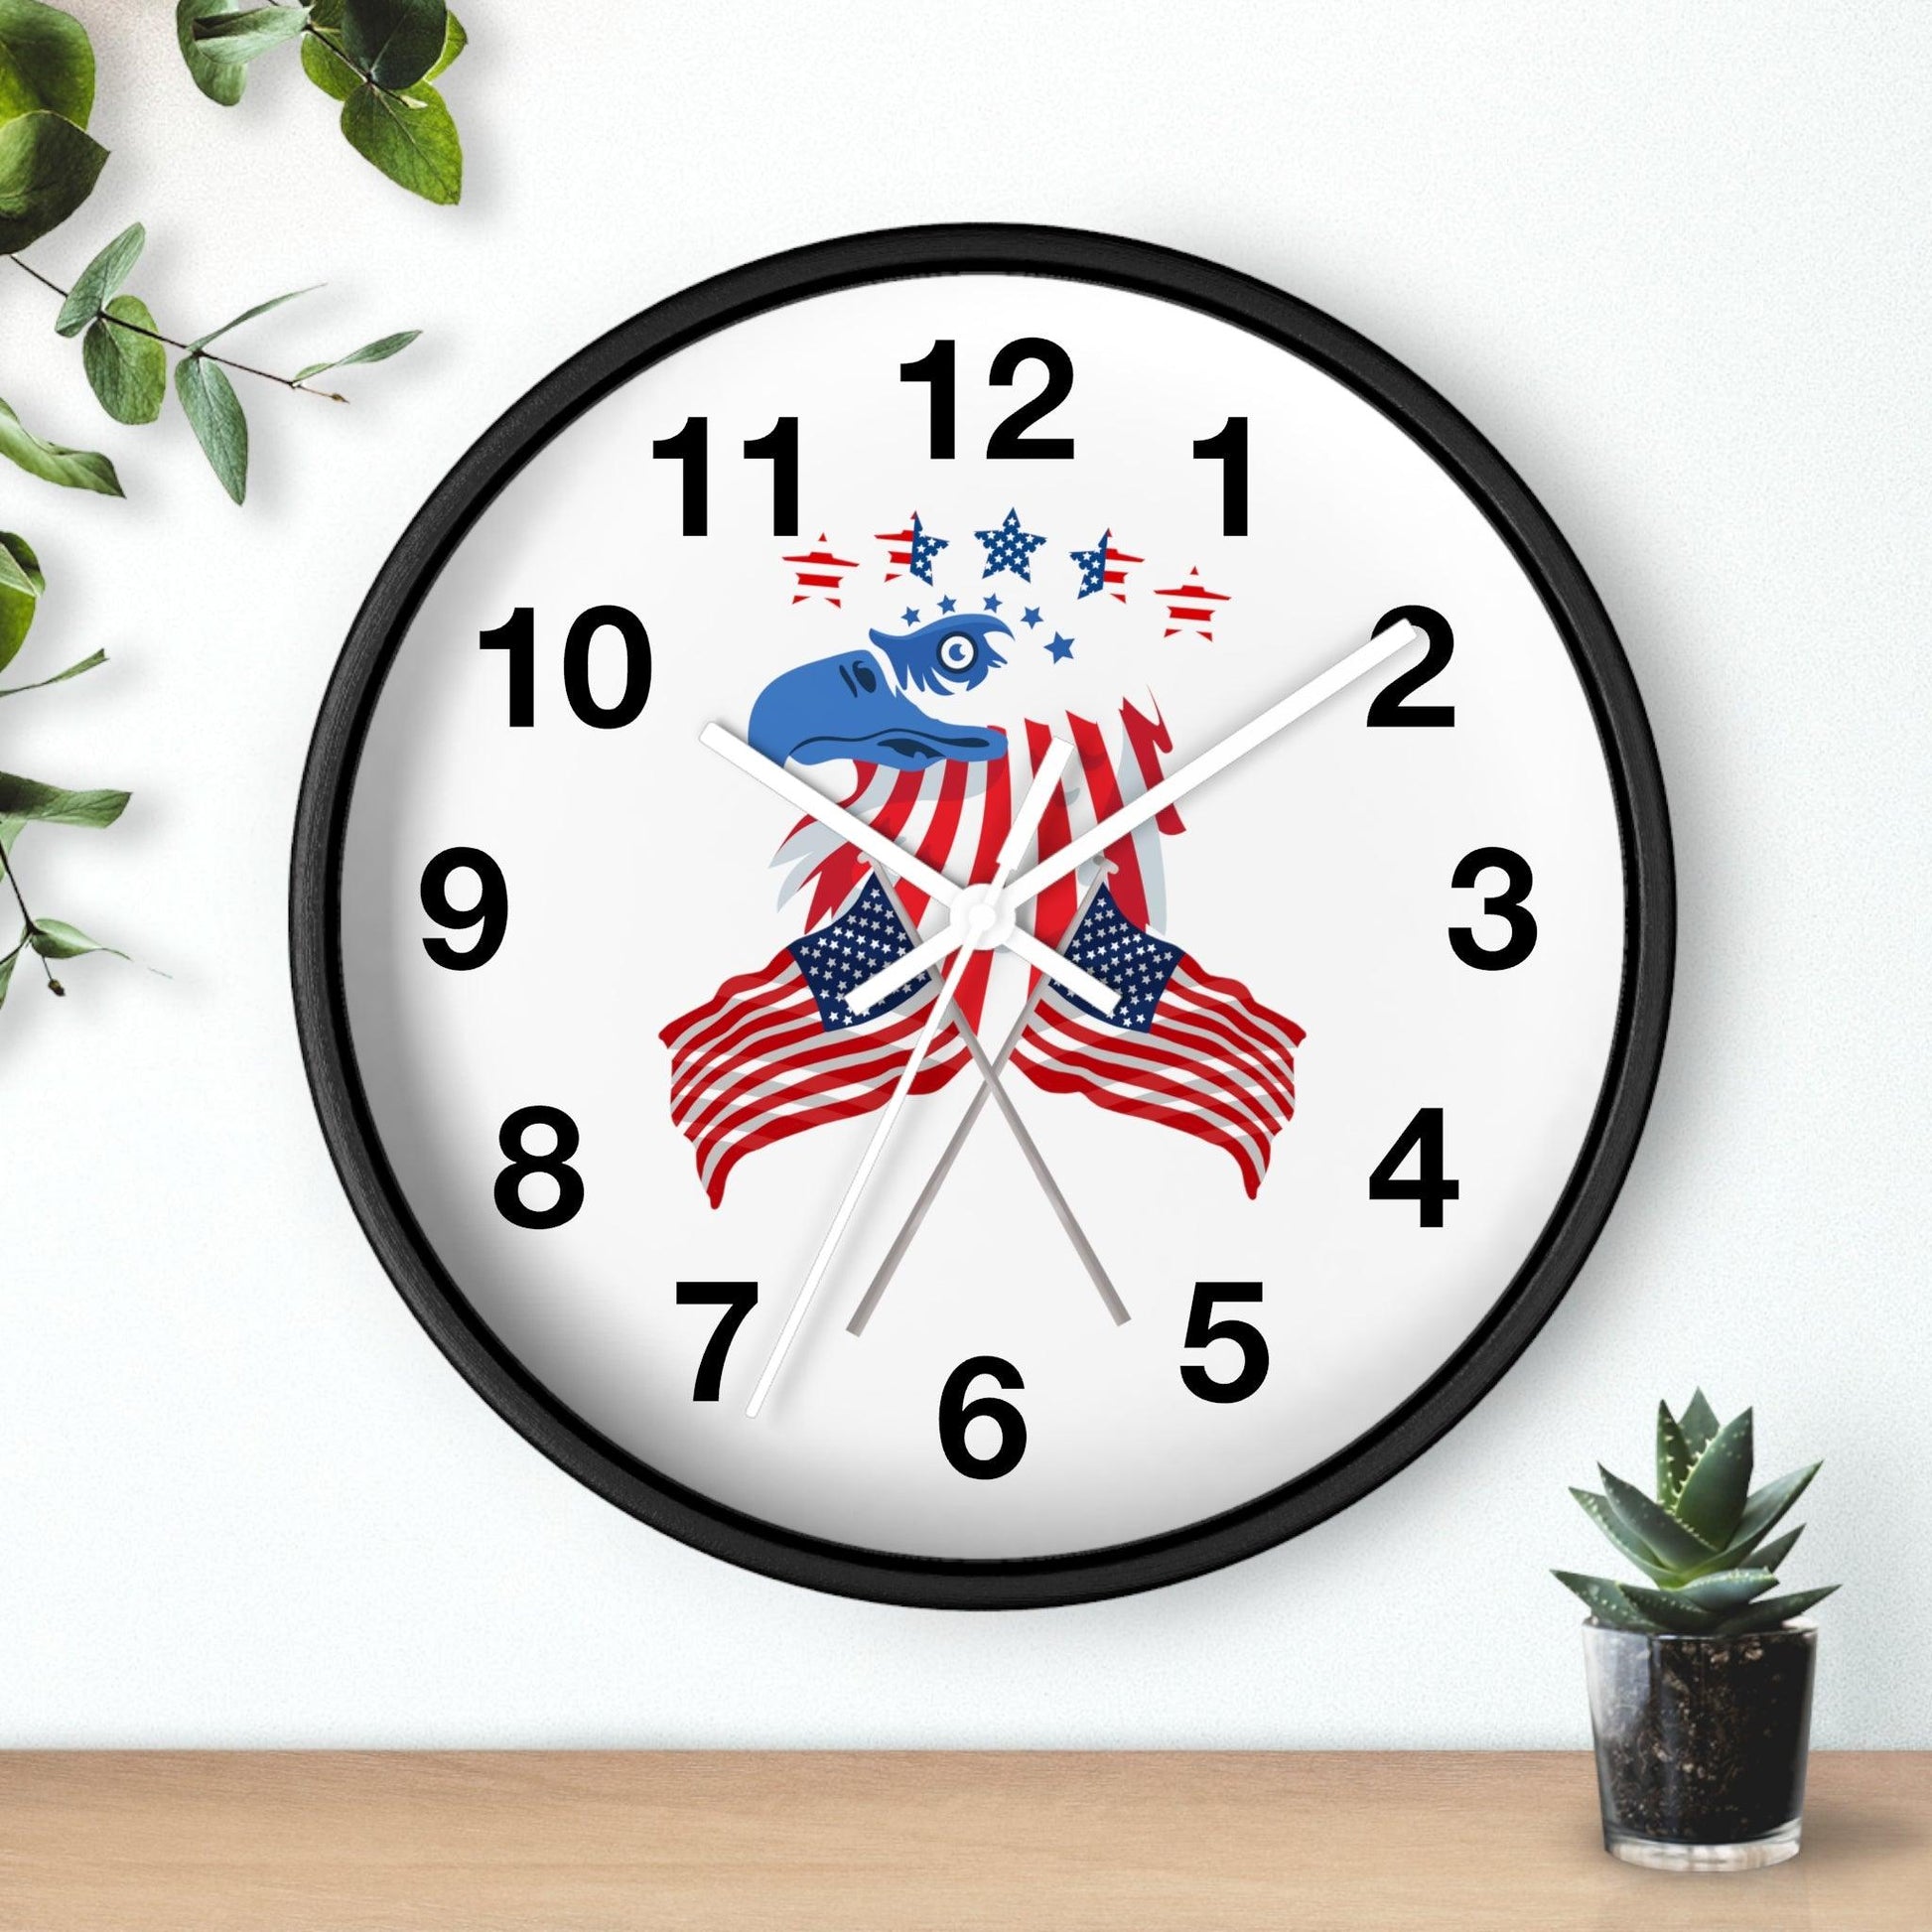 USA Flag Wall Clock, Home decor gift, House Warming gift, New Home Gift, Patriotic Gift School Clock Home Clock Office Clock - Giftsmojo